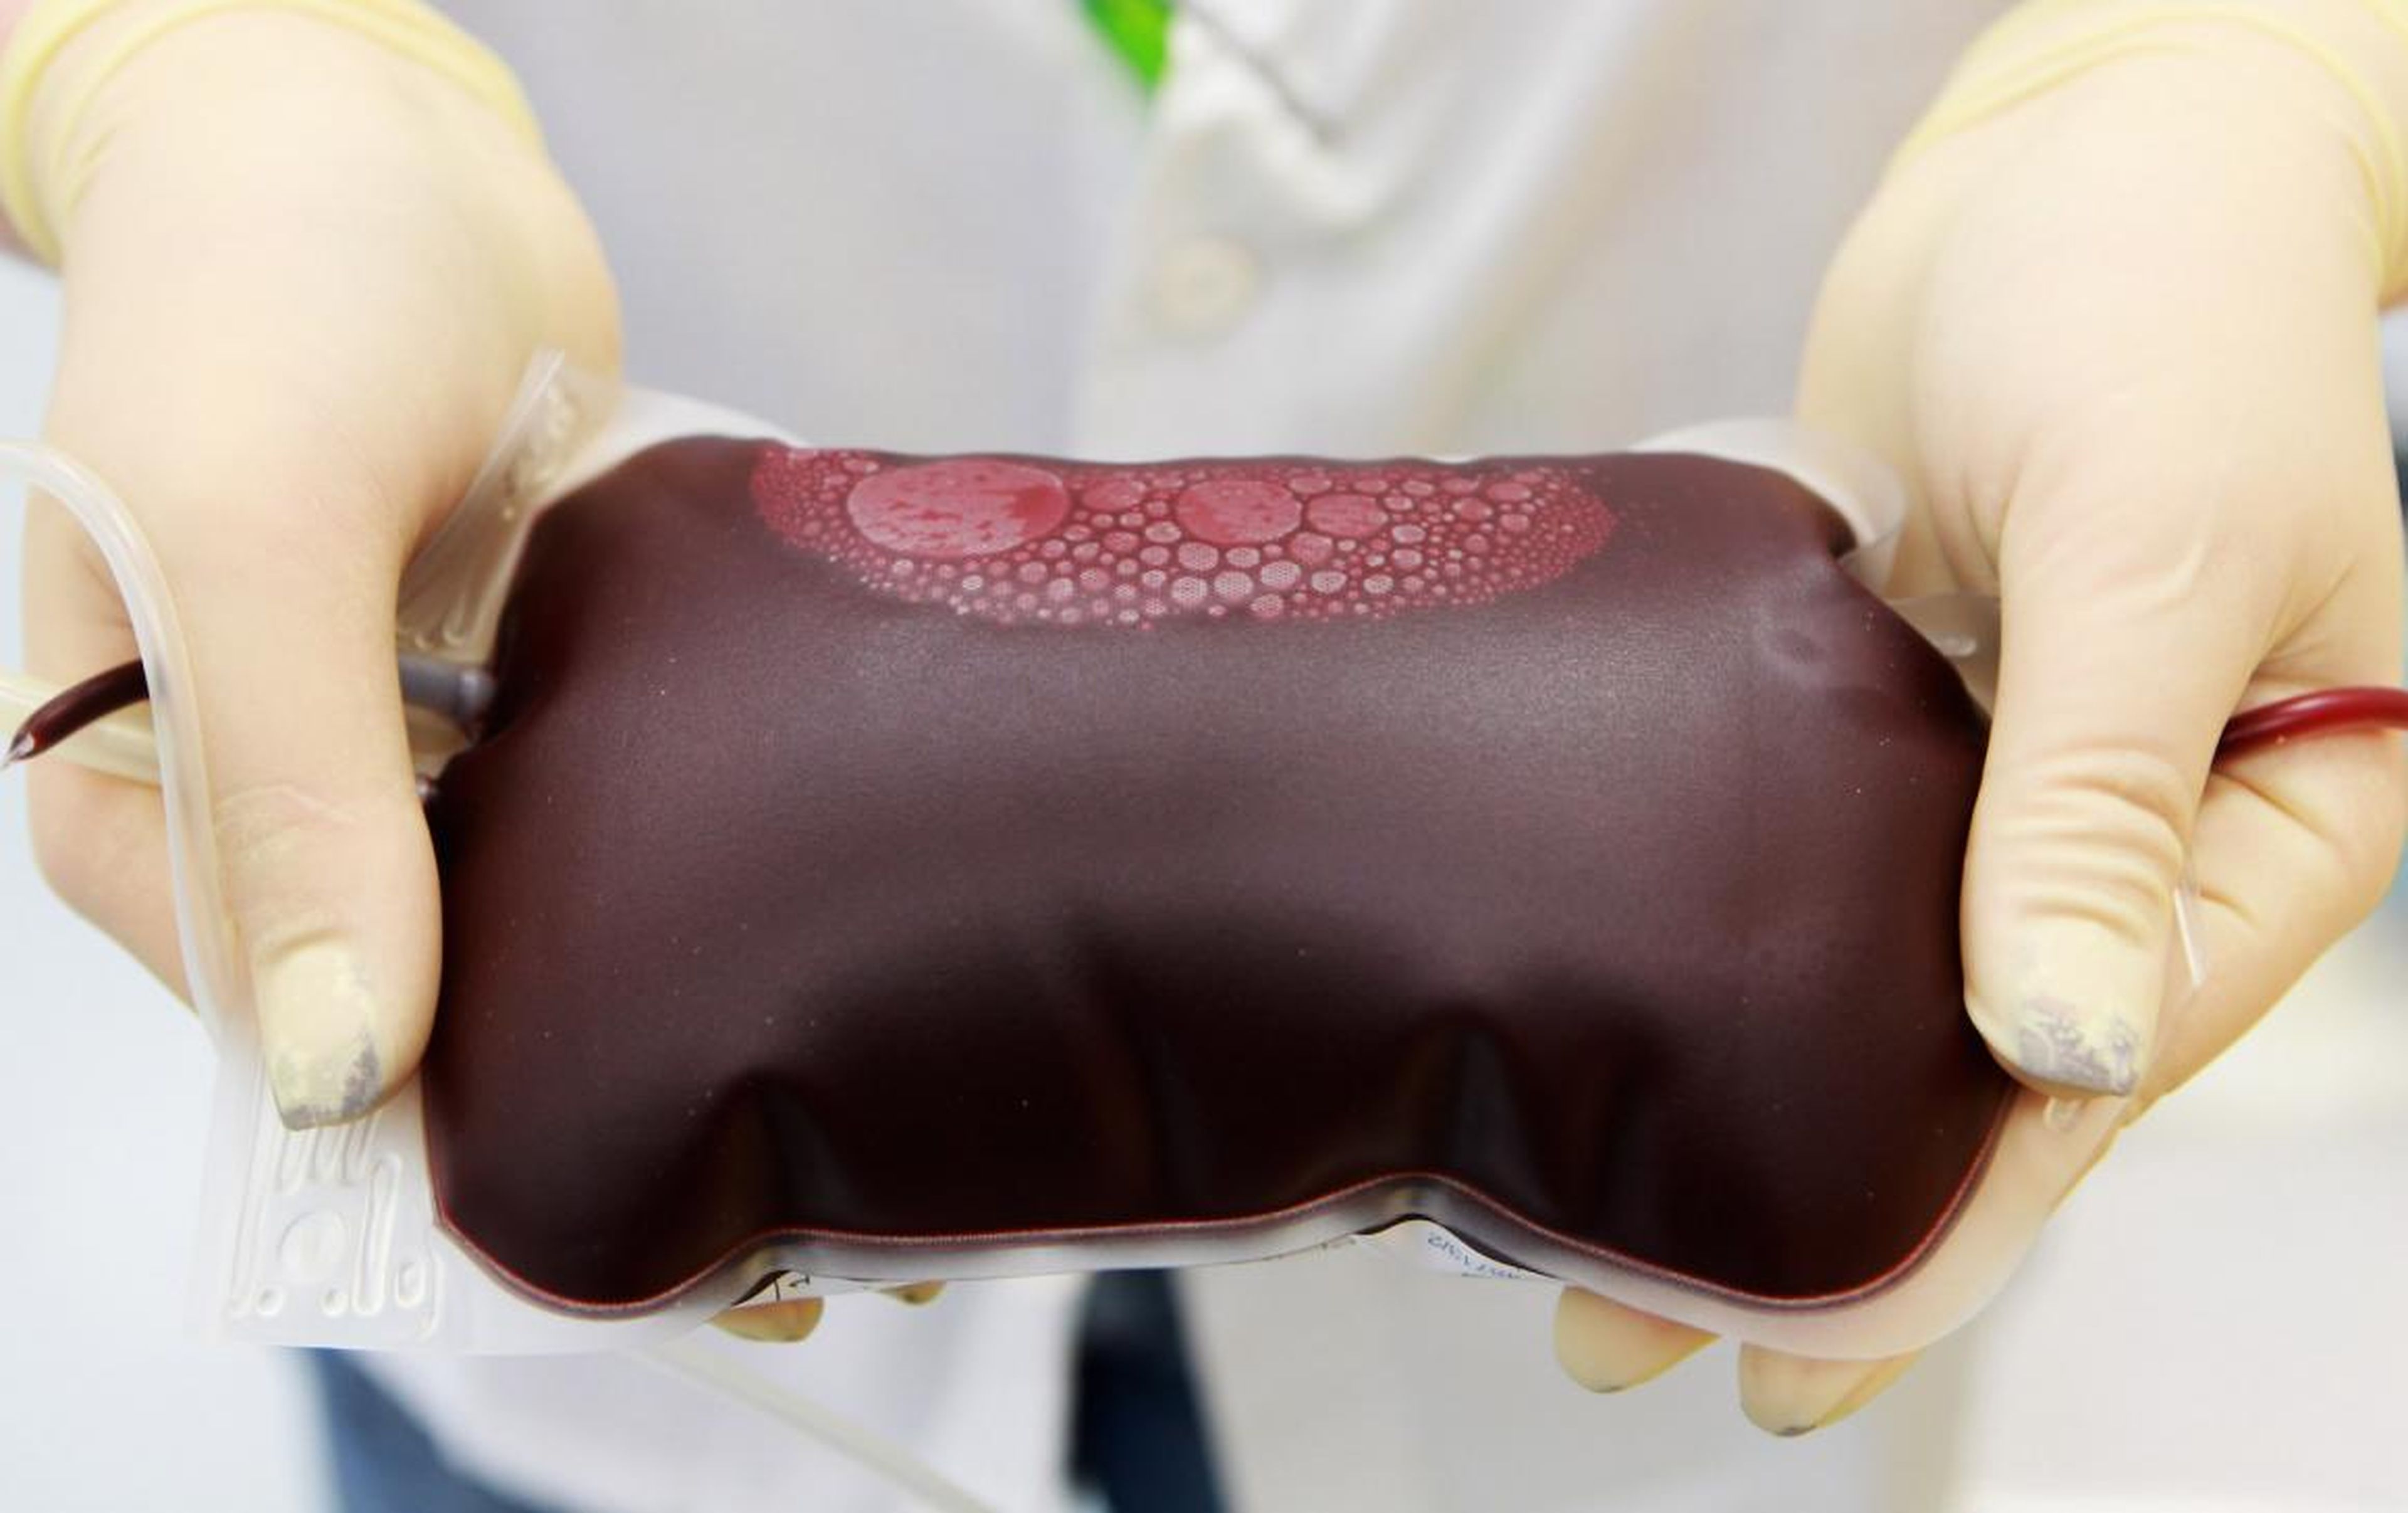 A controversial startup called Ambrosia had offered to fill your veins with the blood of young people for $8,000. It said on Tuesday that it had stopped providing the procedure.